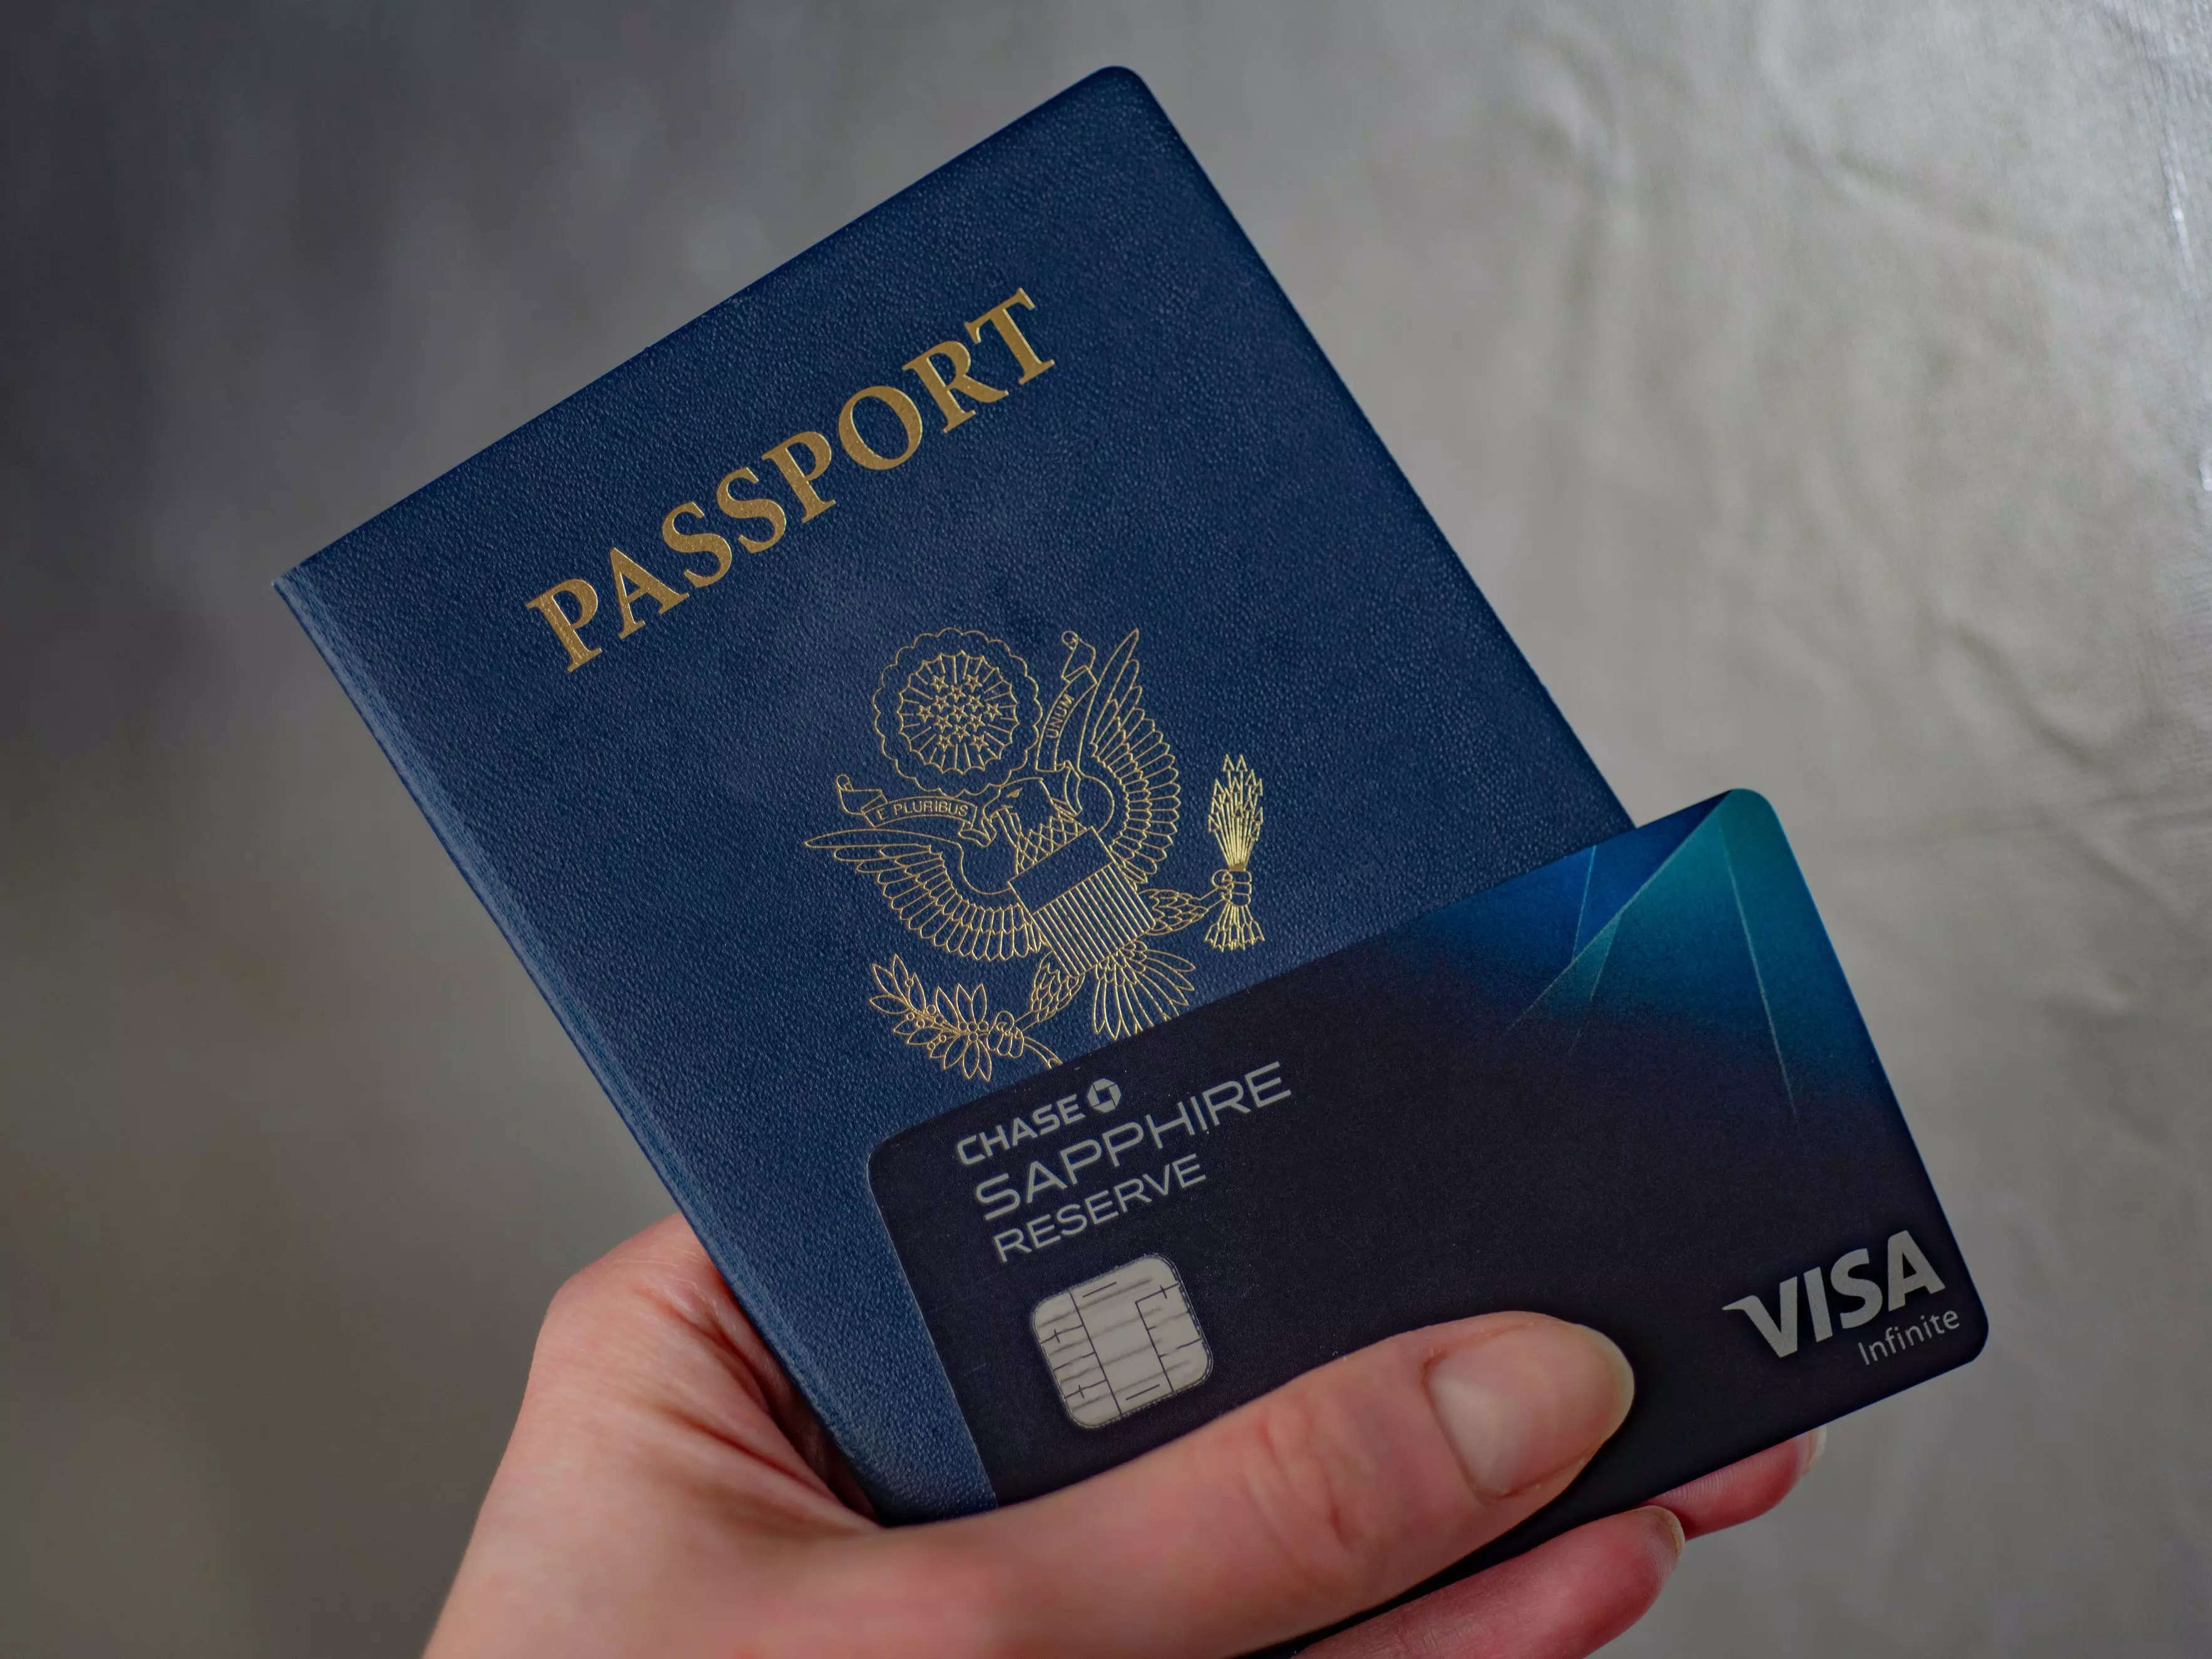 Passport and Chase Sapphire Reserve credit card